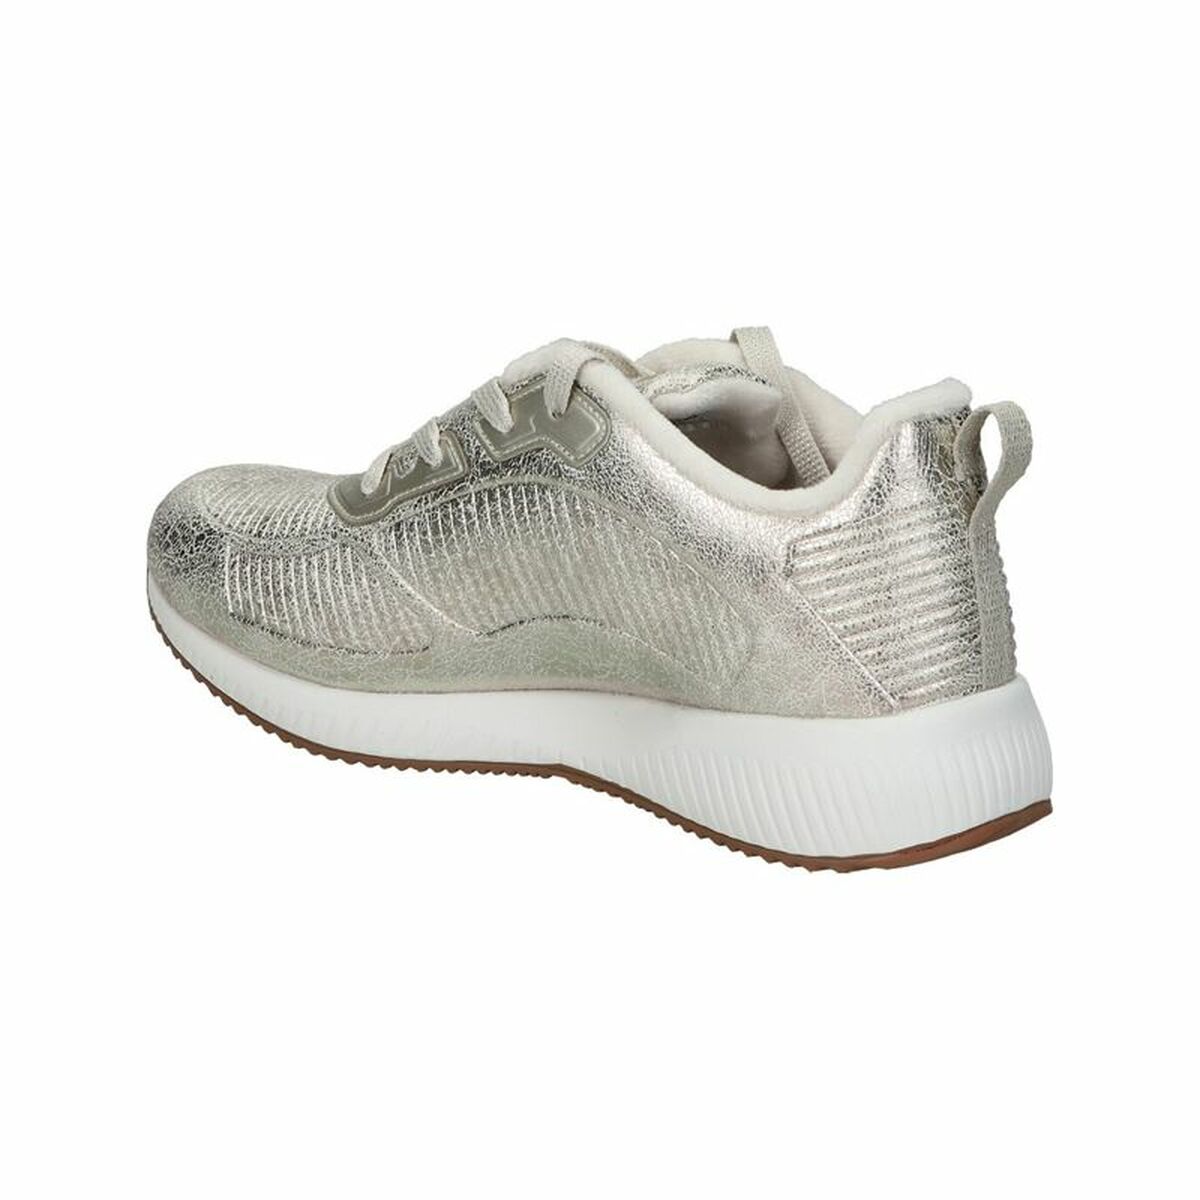 Sports Trainers for Women Skechers Bobs Sparkle Life Light grey